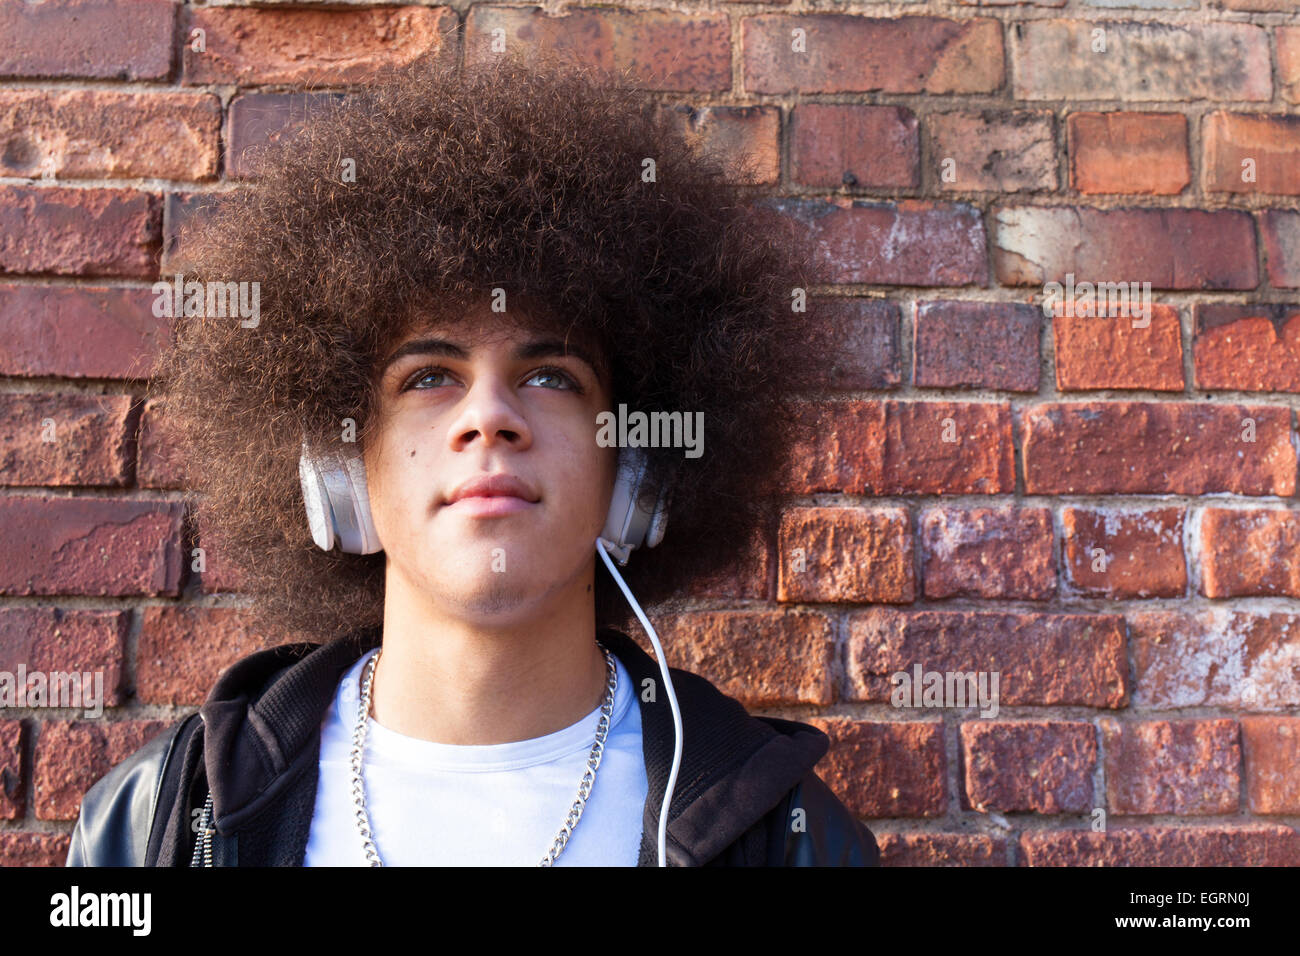 A teenager listening to music wearing Dr Dre Beats headphones. Stock Photo